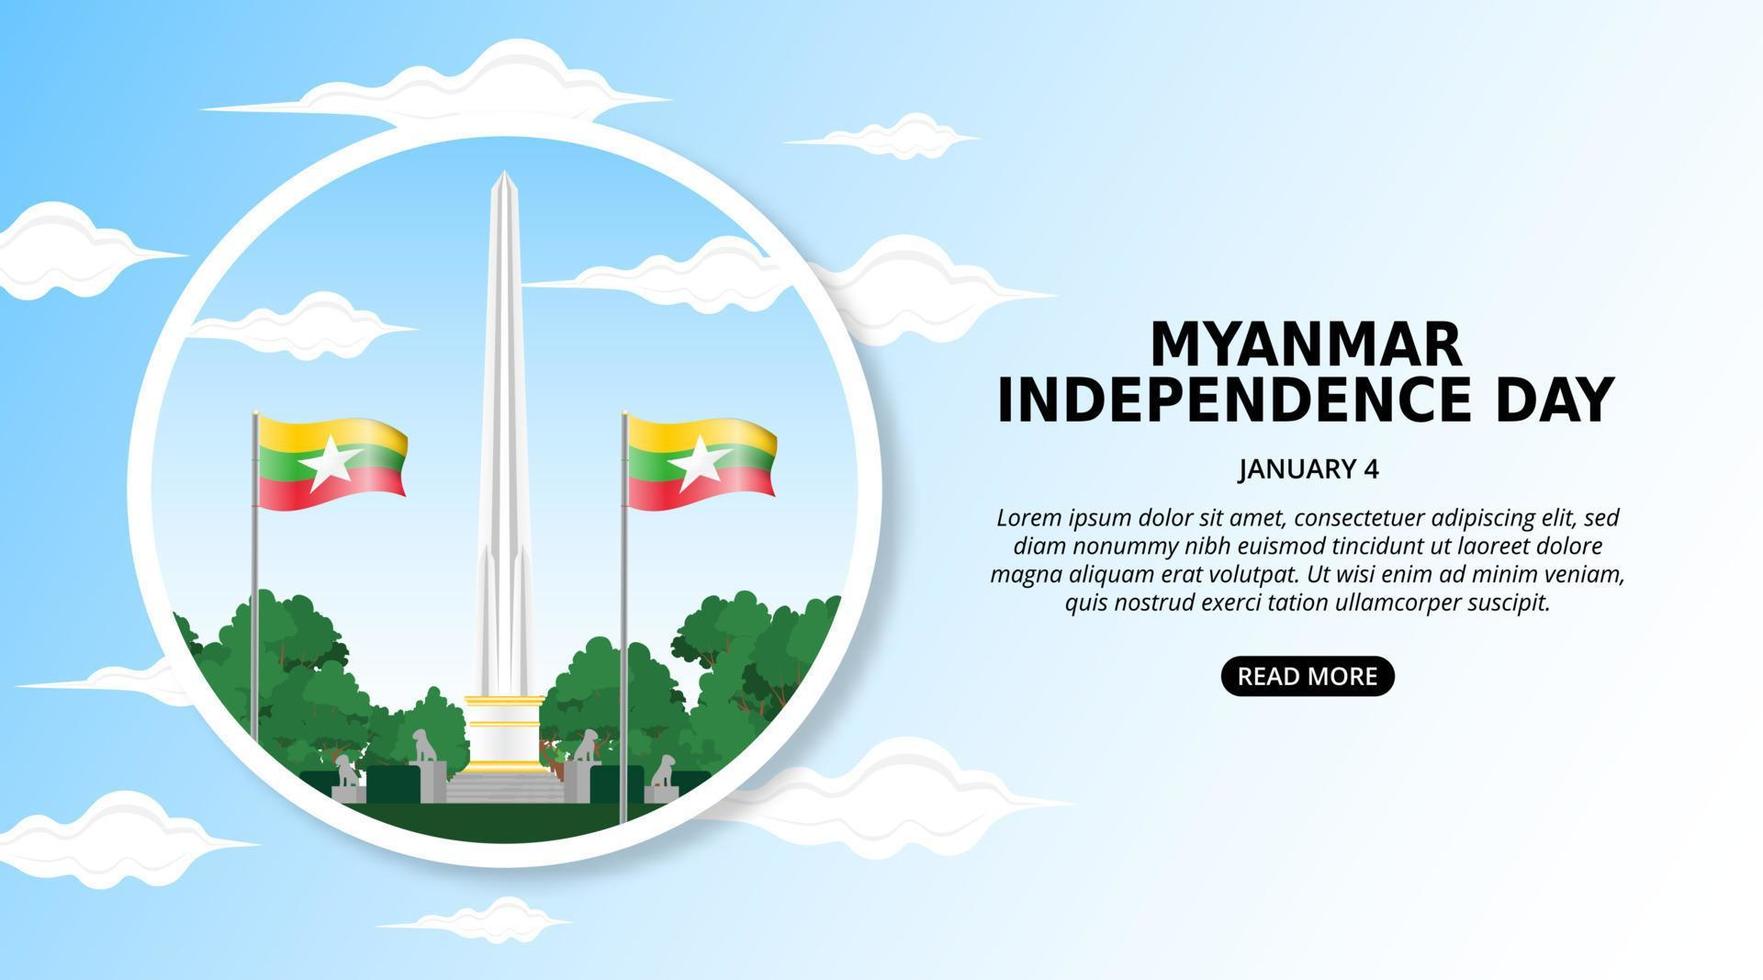 Myanmar independence day background with photo of independence monument garden and flag vector